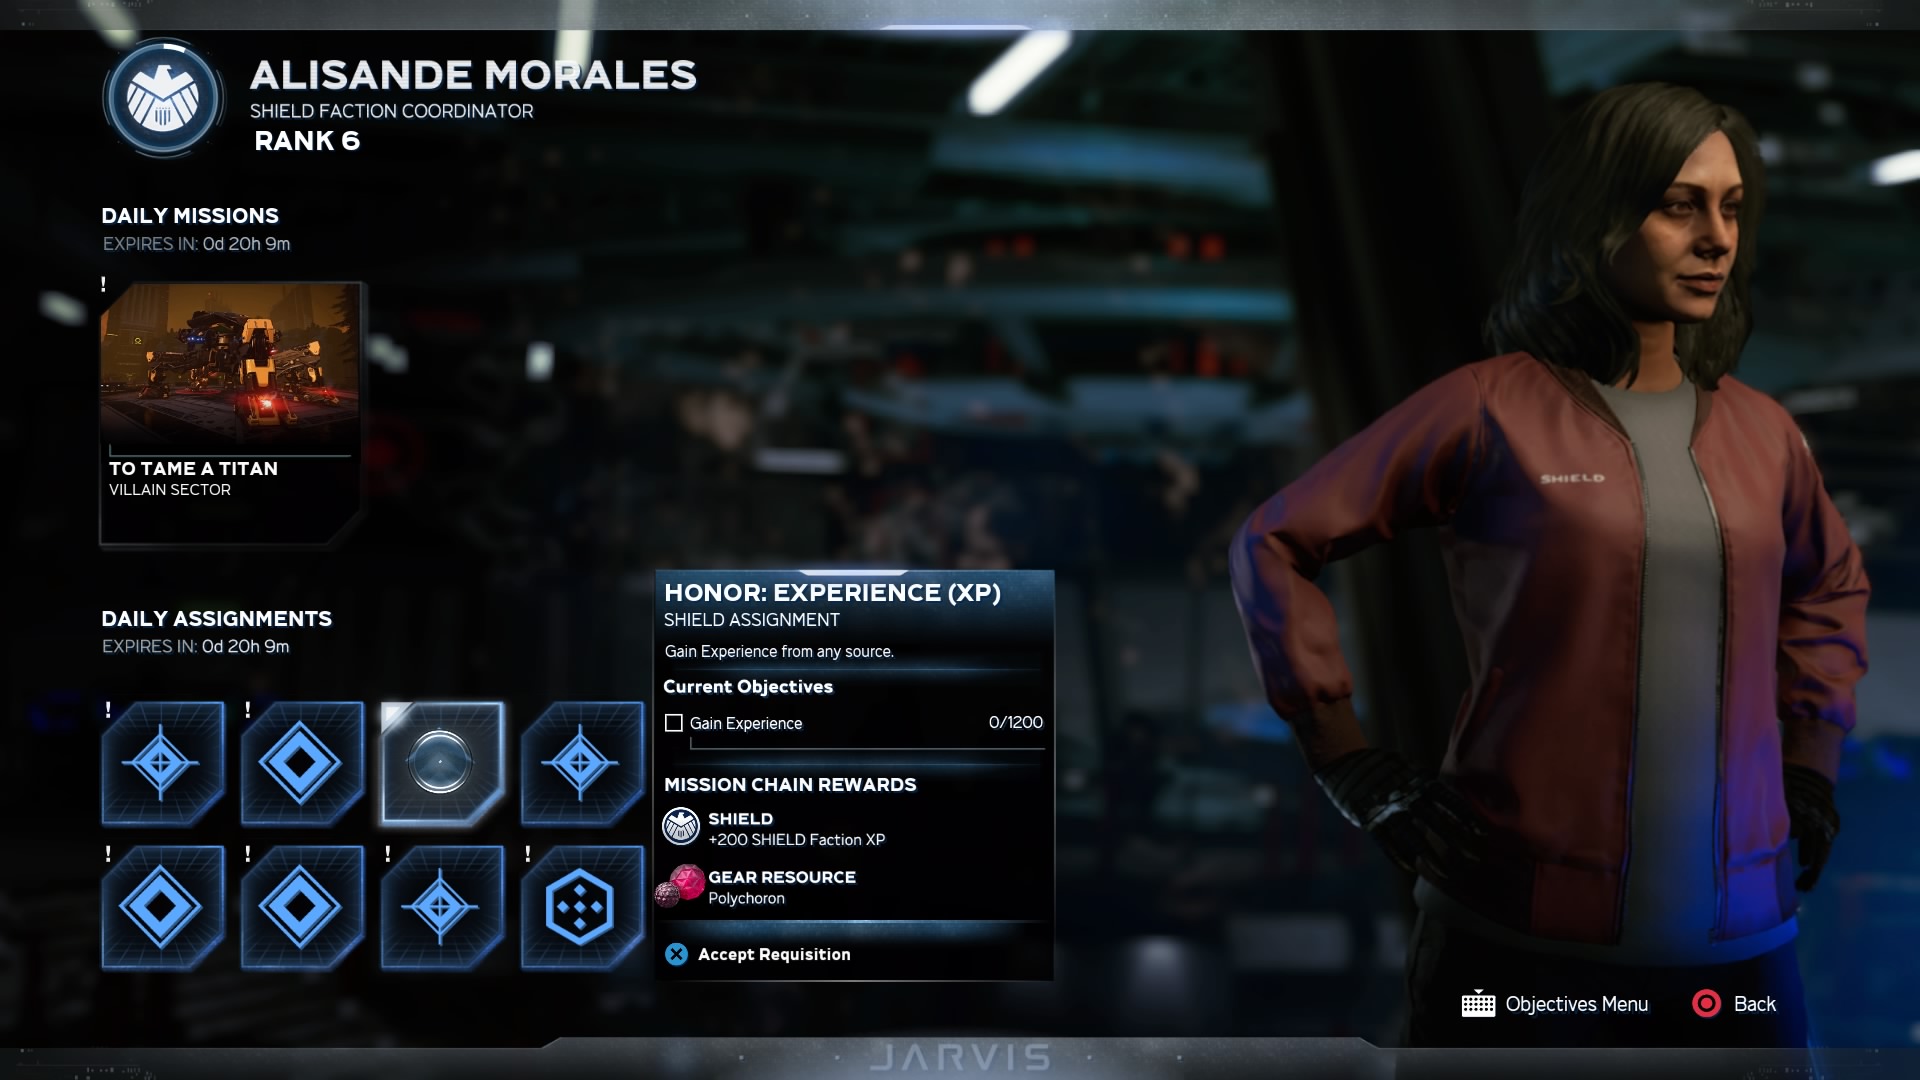 Alisande Morales, the SHIELD faction coordinator, will give you daily assignments. (Screenshot: Square Enix / Kotaku)